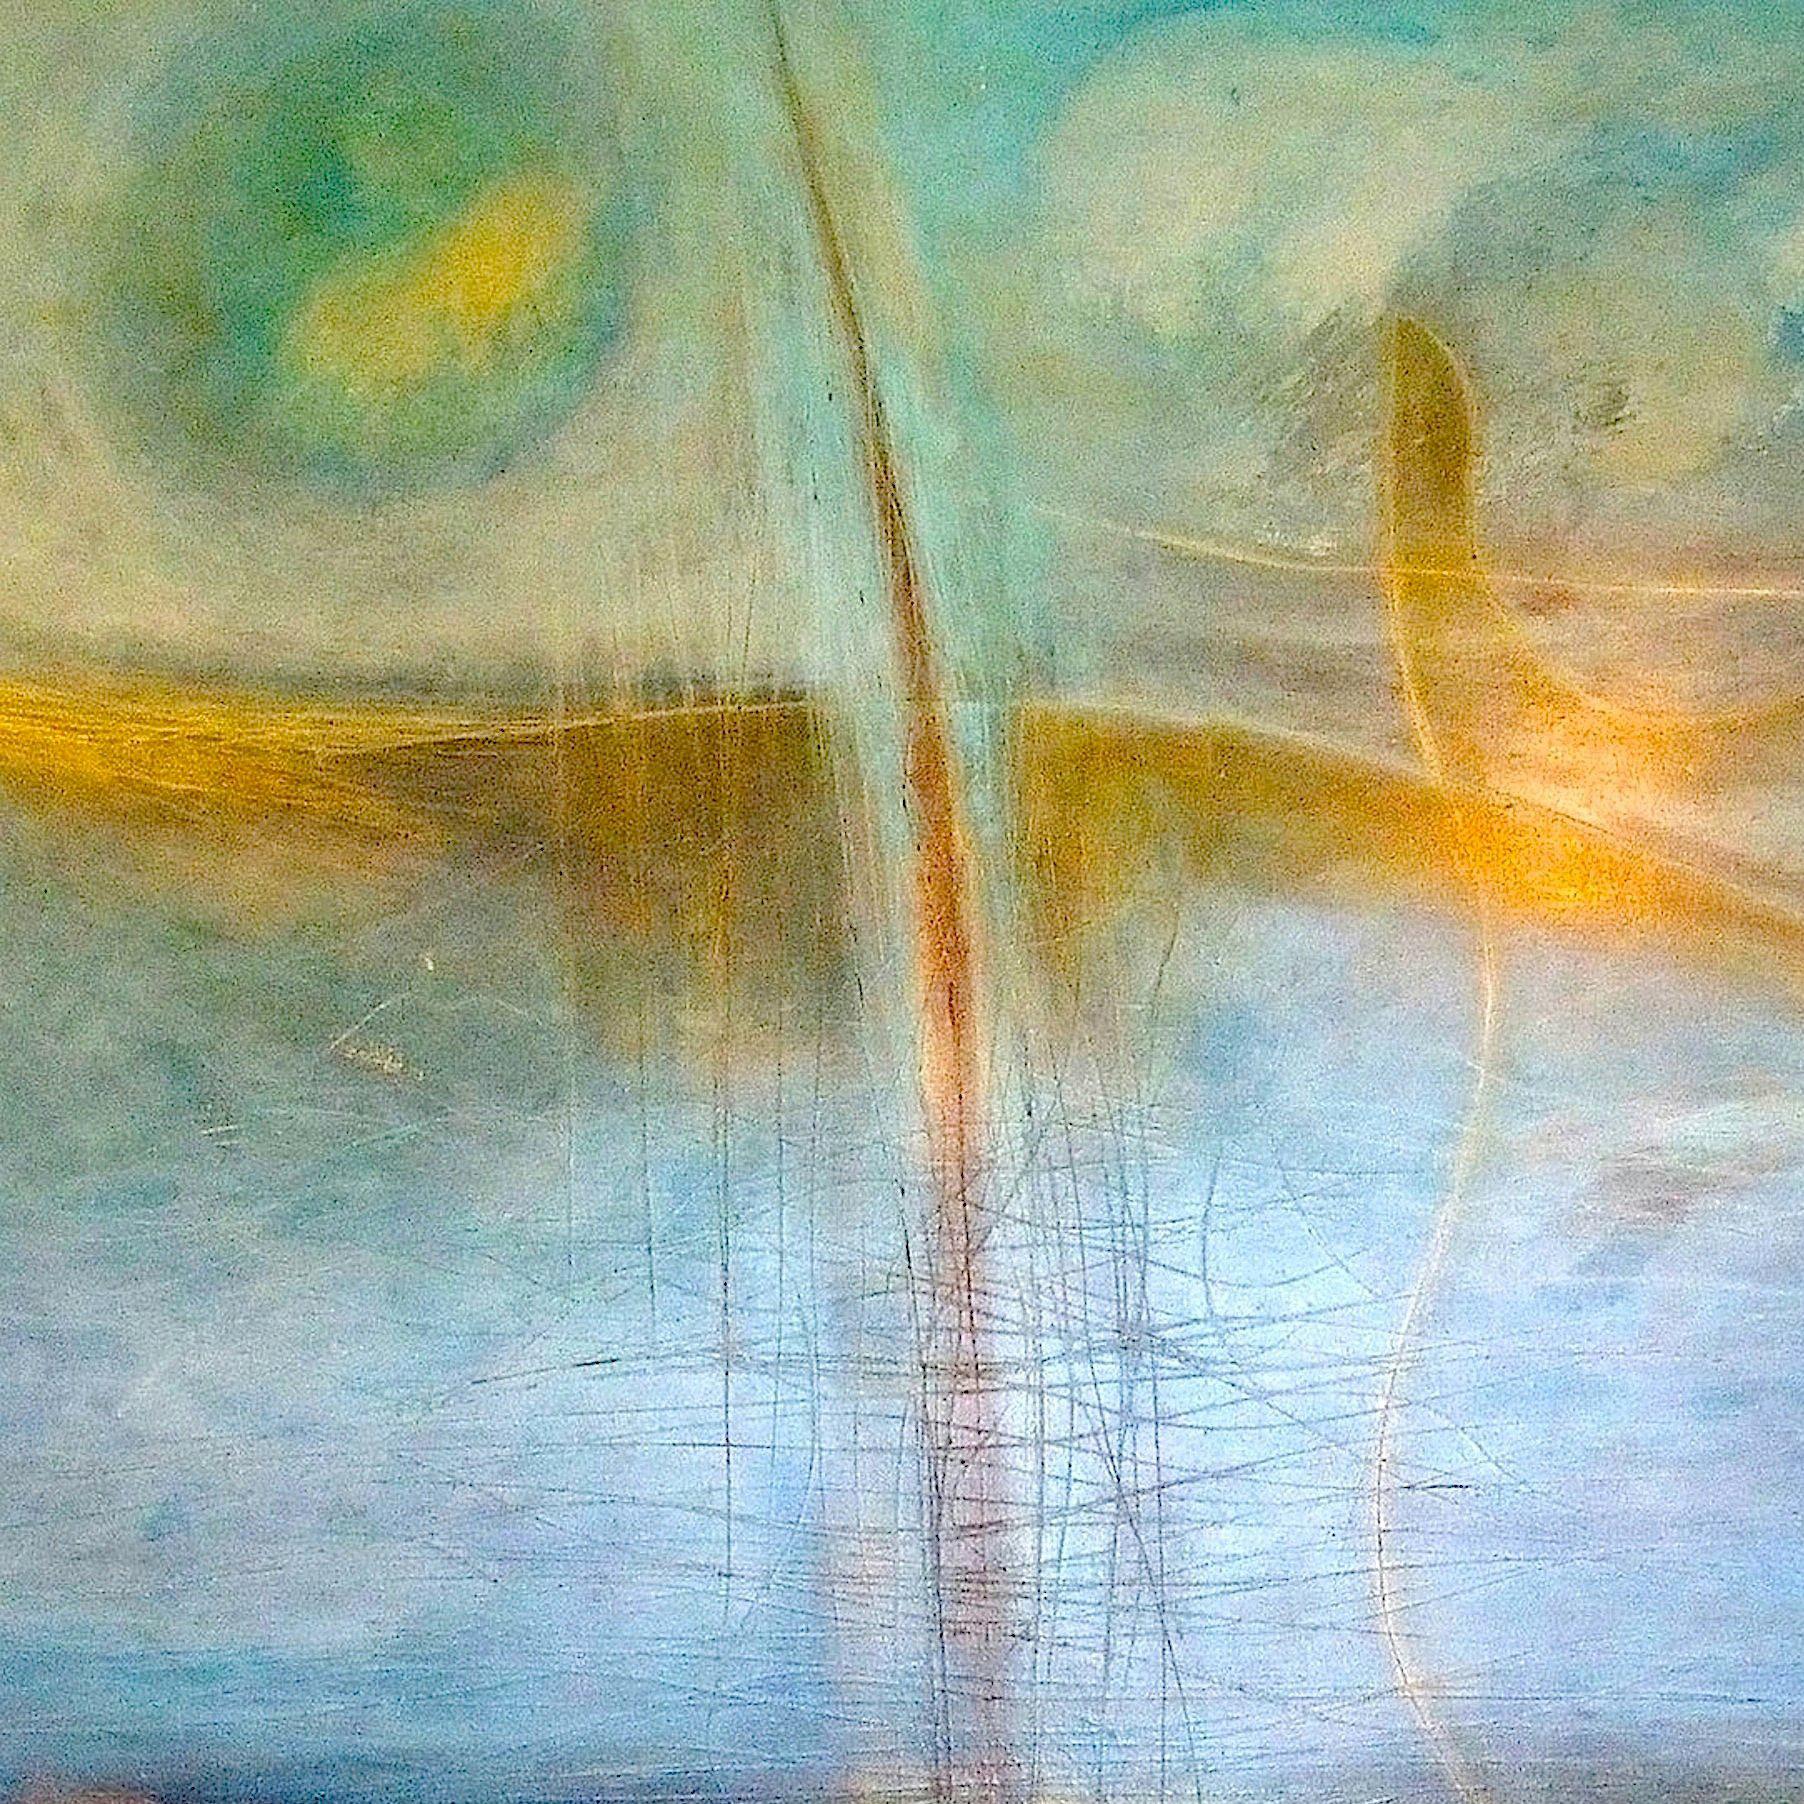 Lark Ascending - Painting by Patricia McParlin